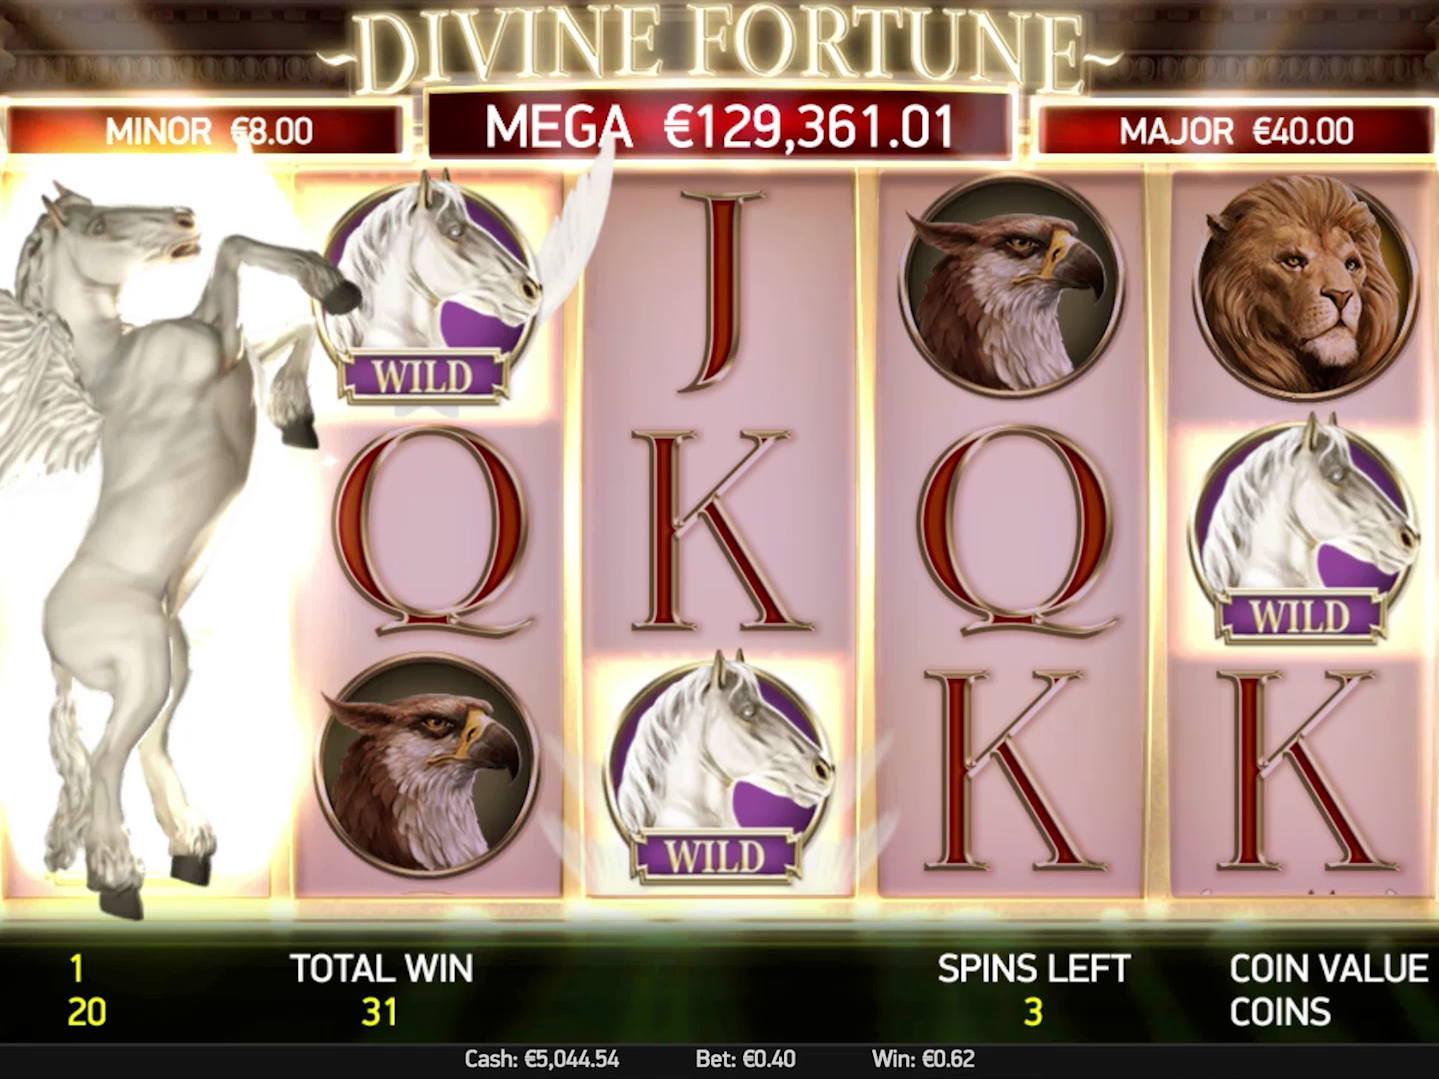 What Is A Wild Symbol In Slots?